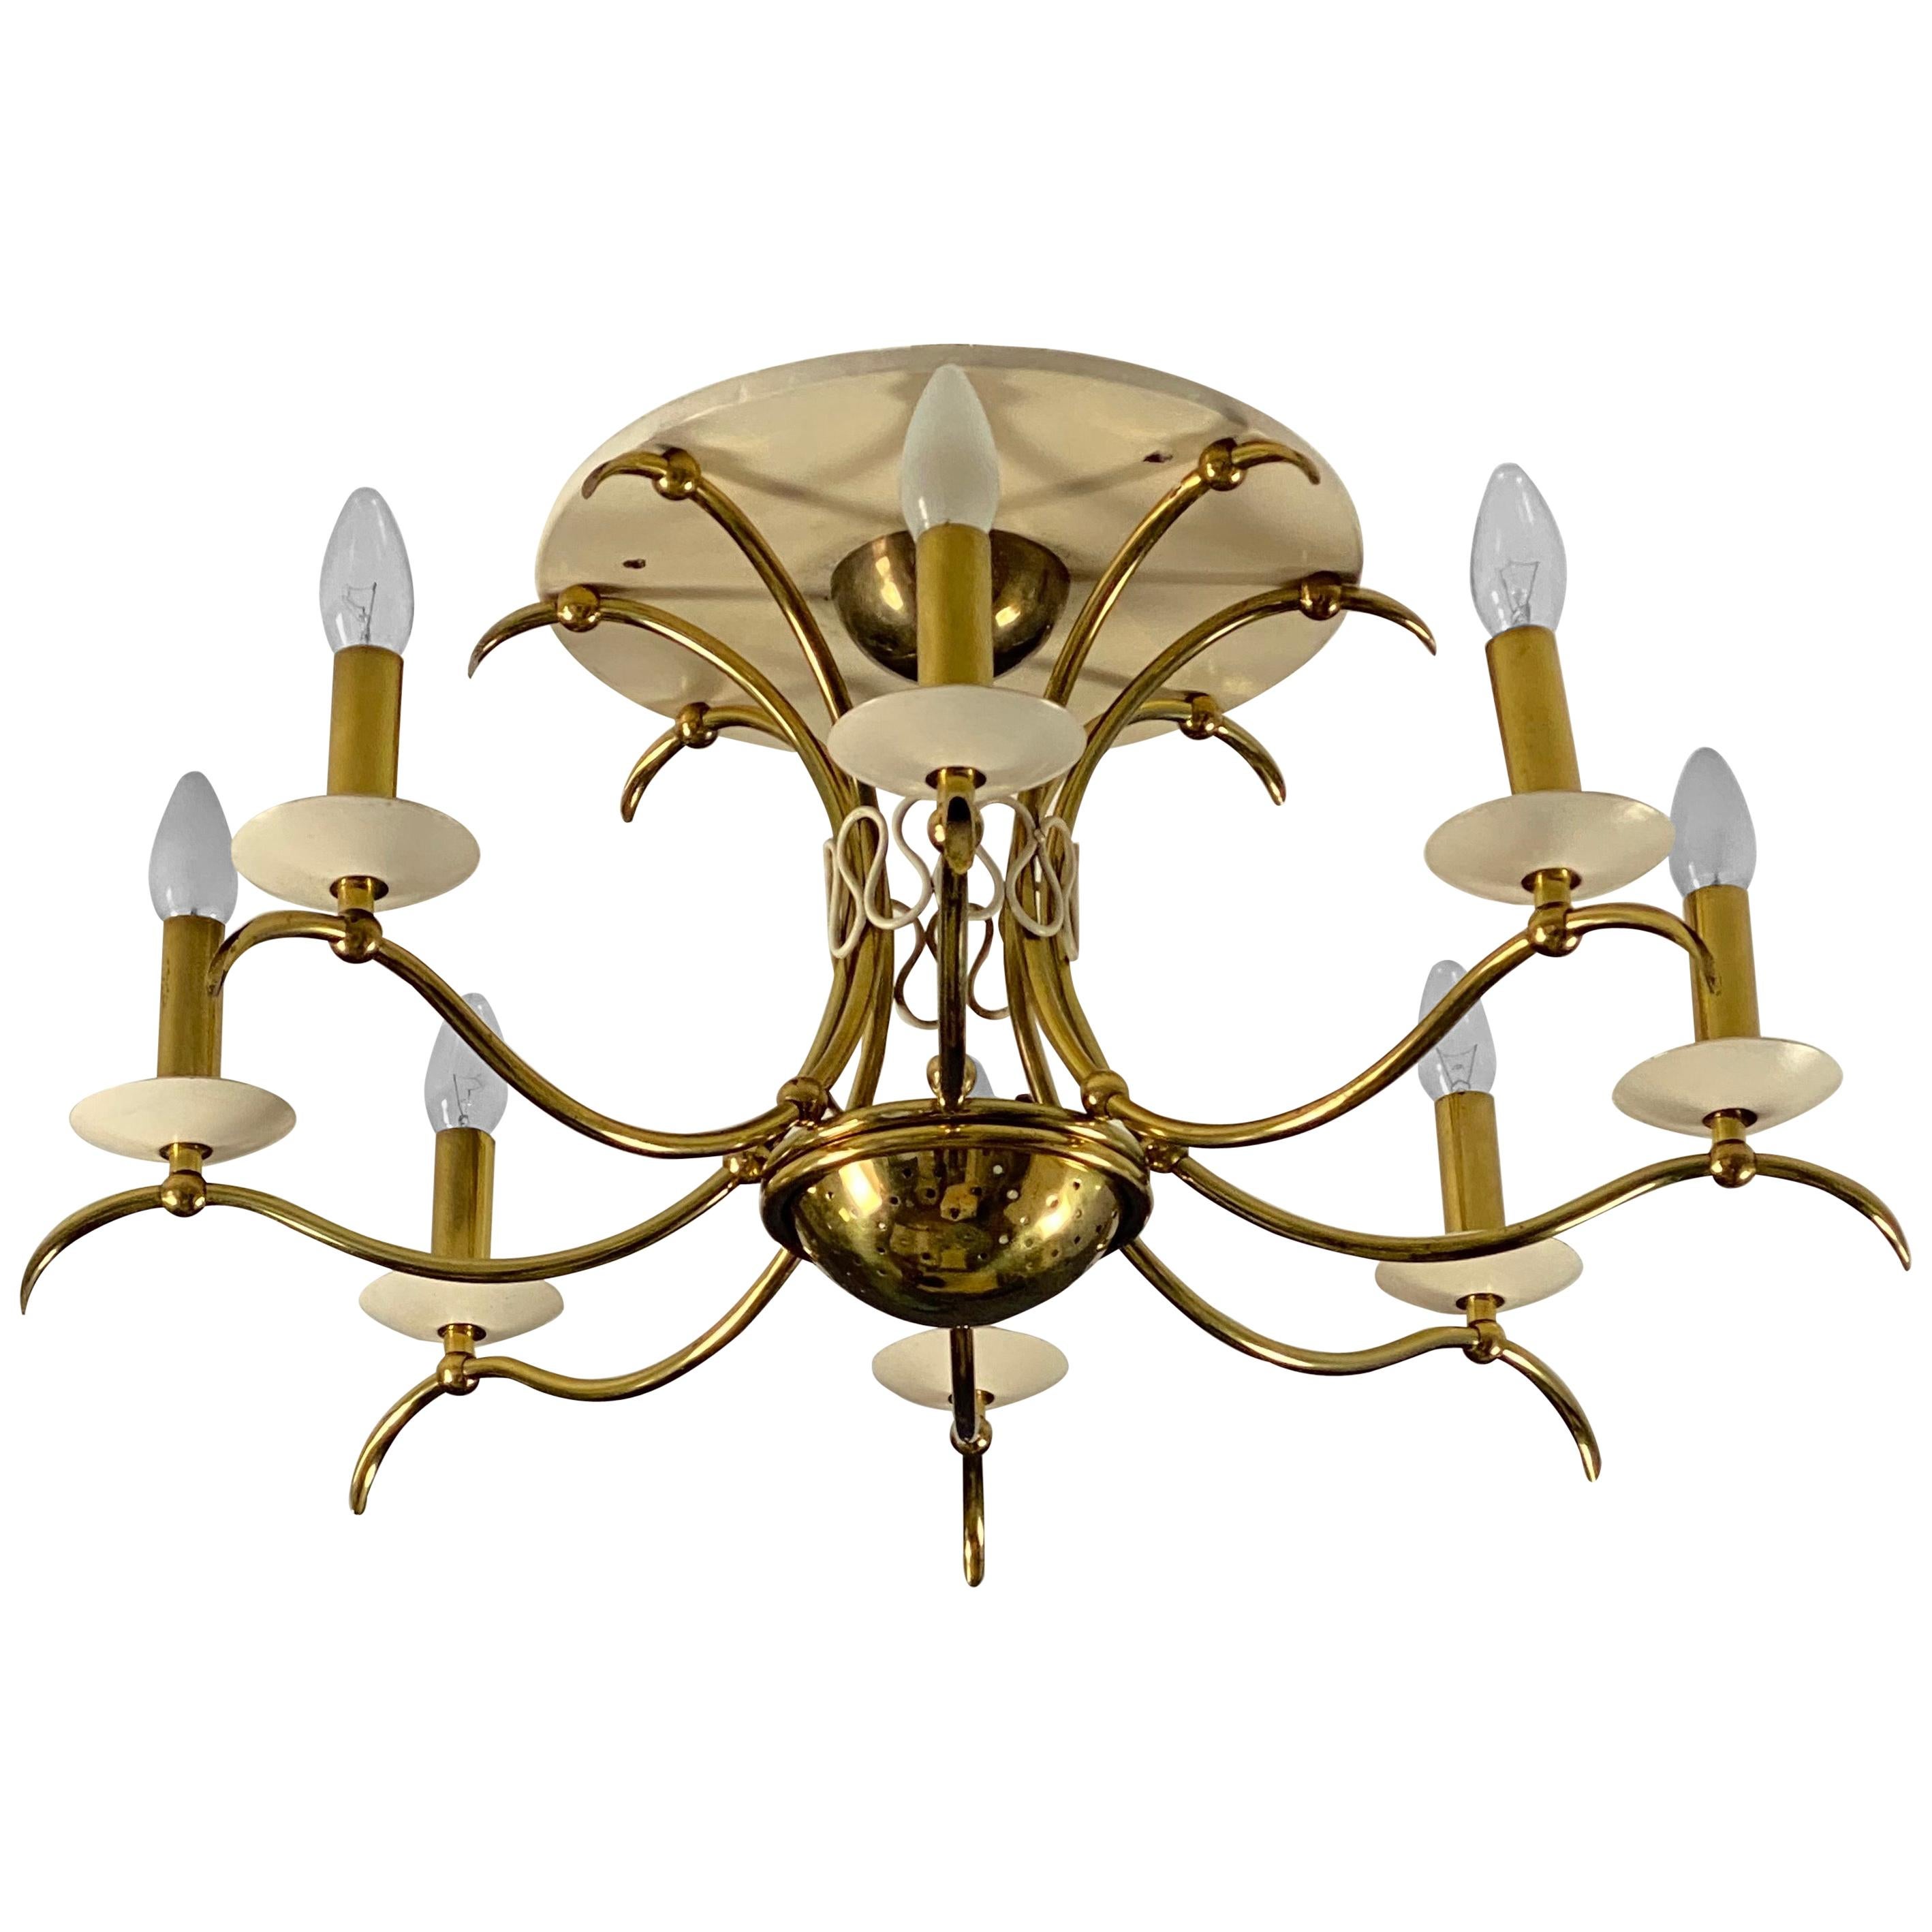 Midcentury Brass Chandelier Flush Mount 1950s in the Style of or from Gio Ponti